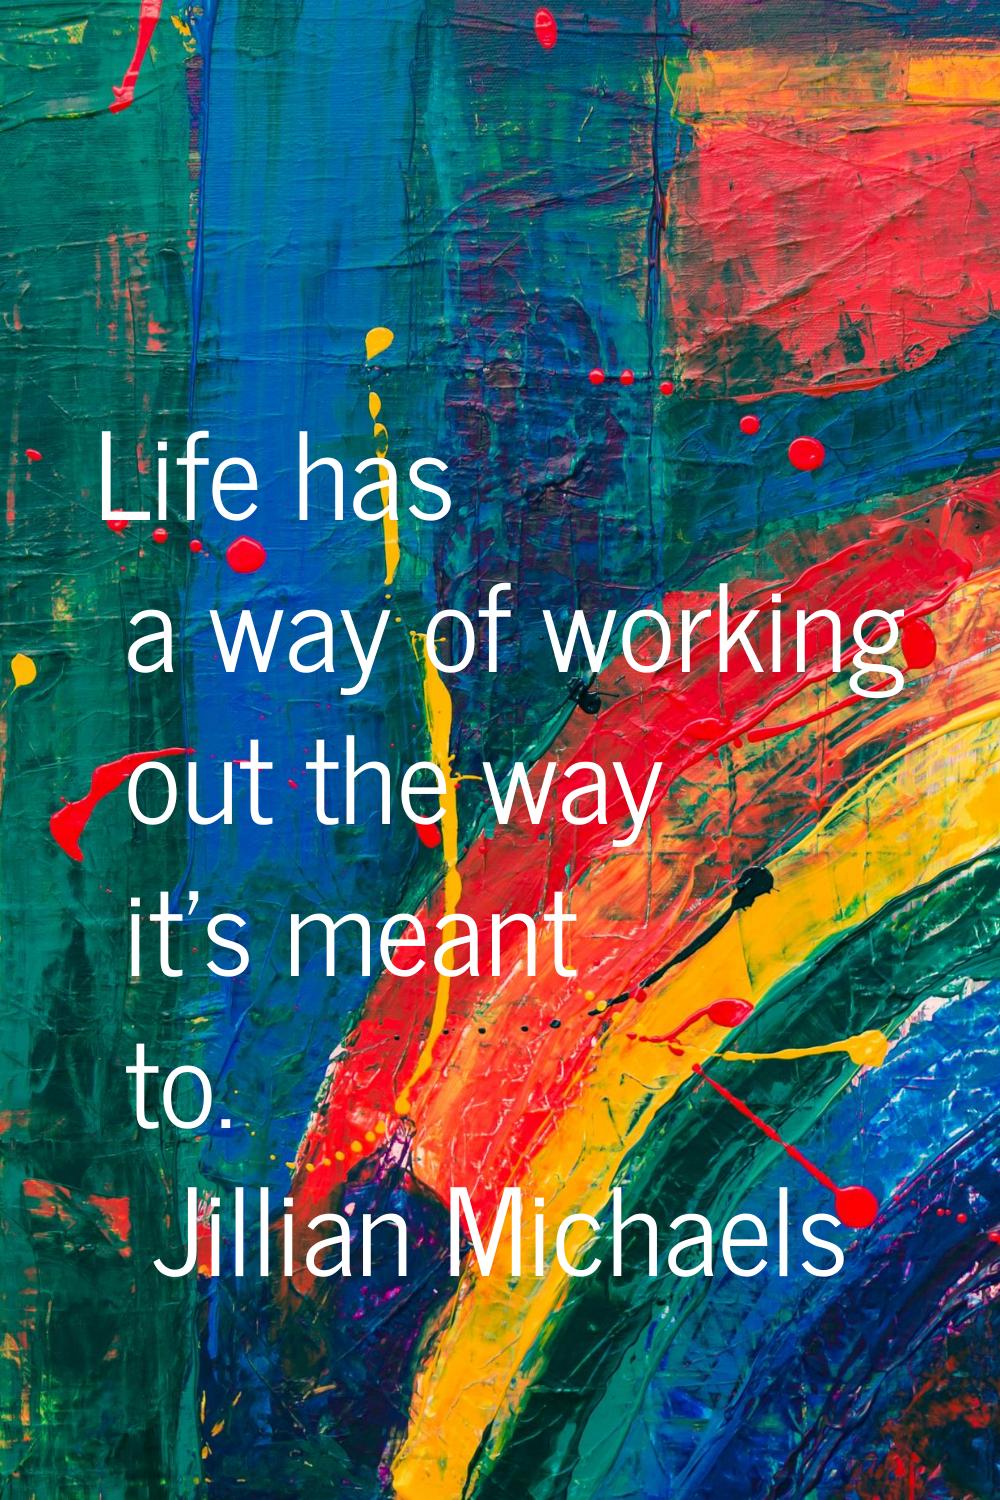 Life has a way of working out the way it's meant to.